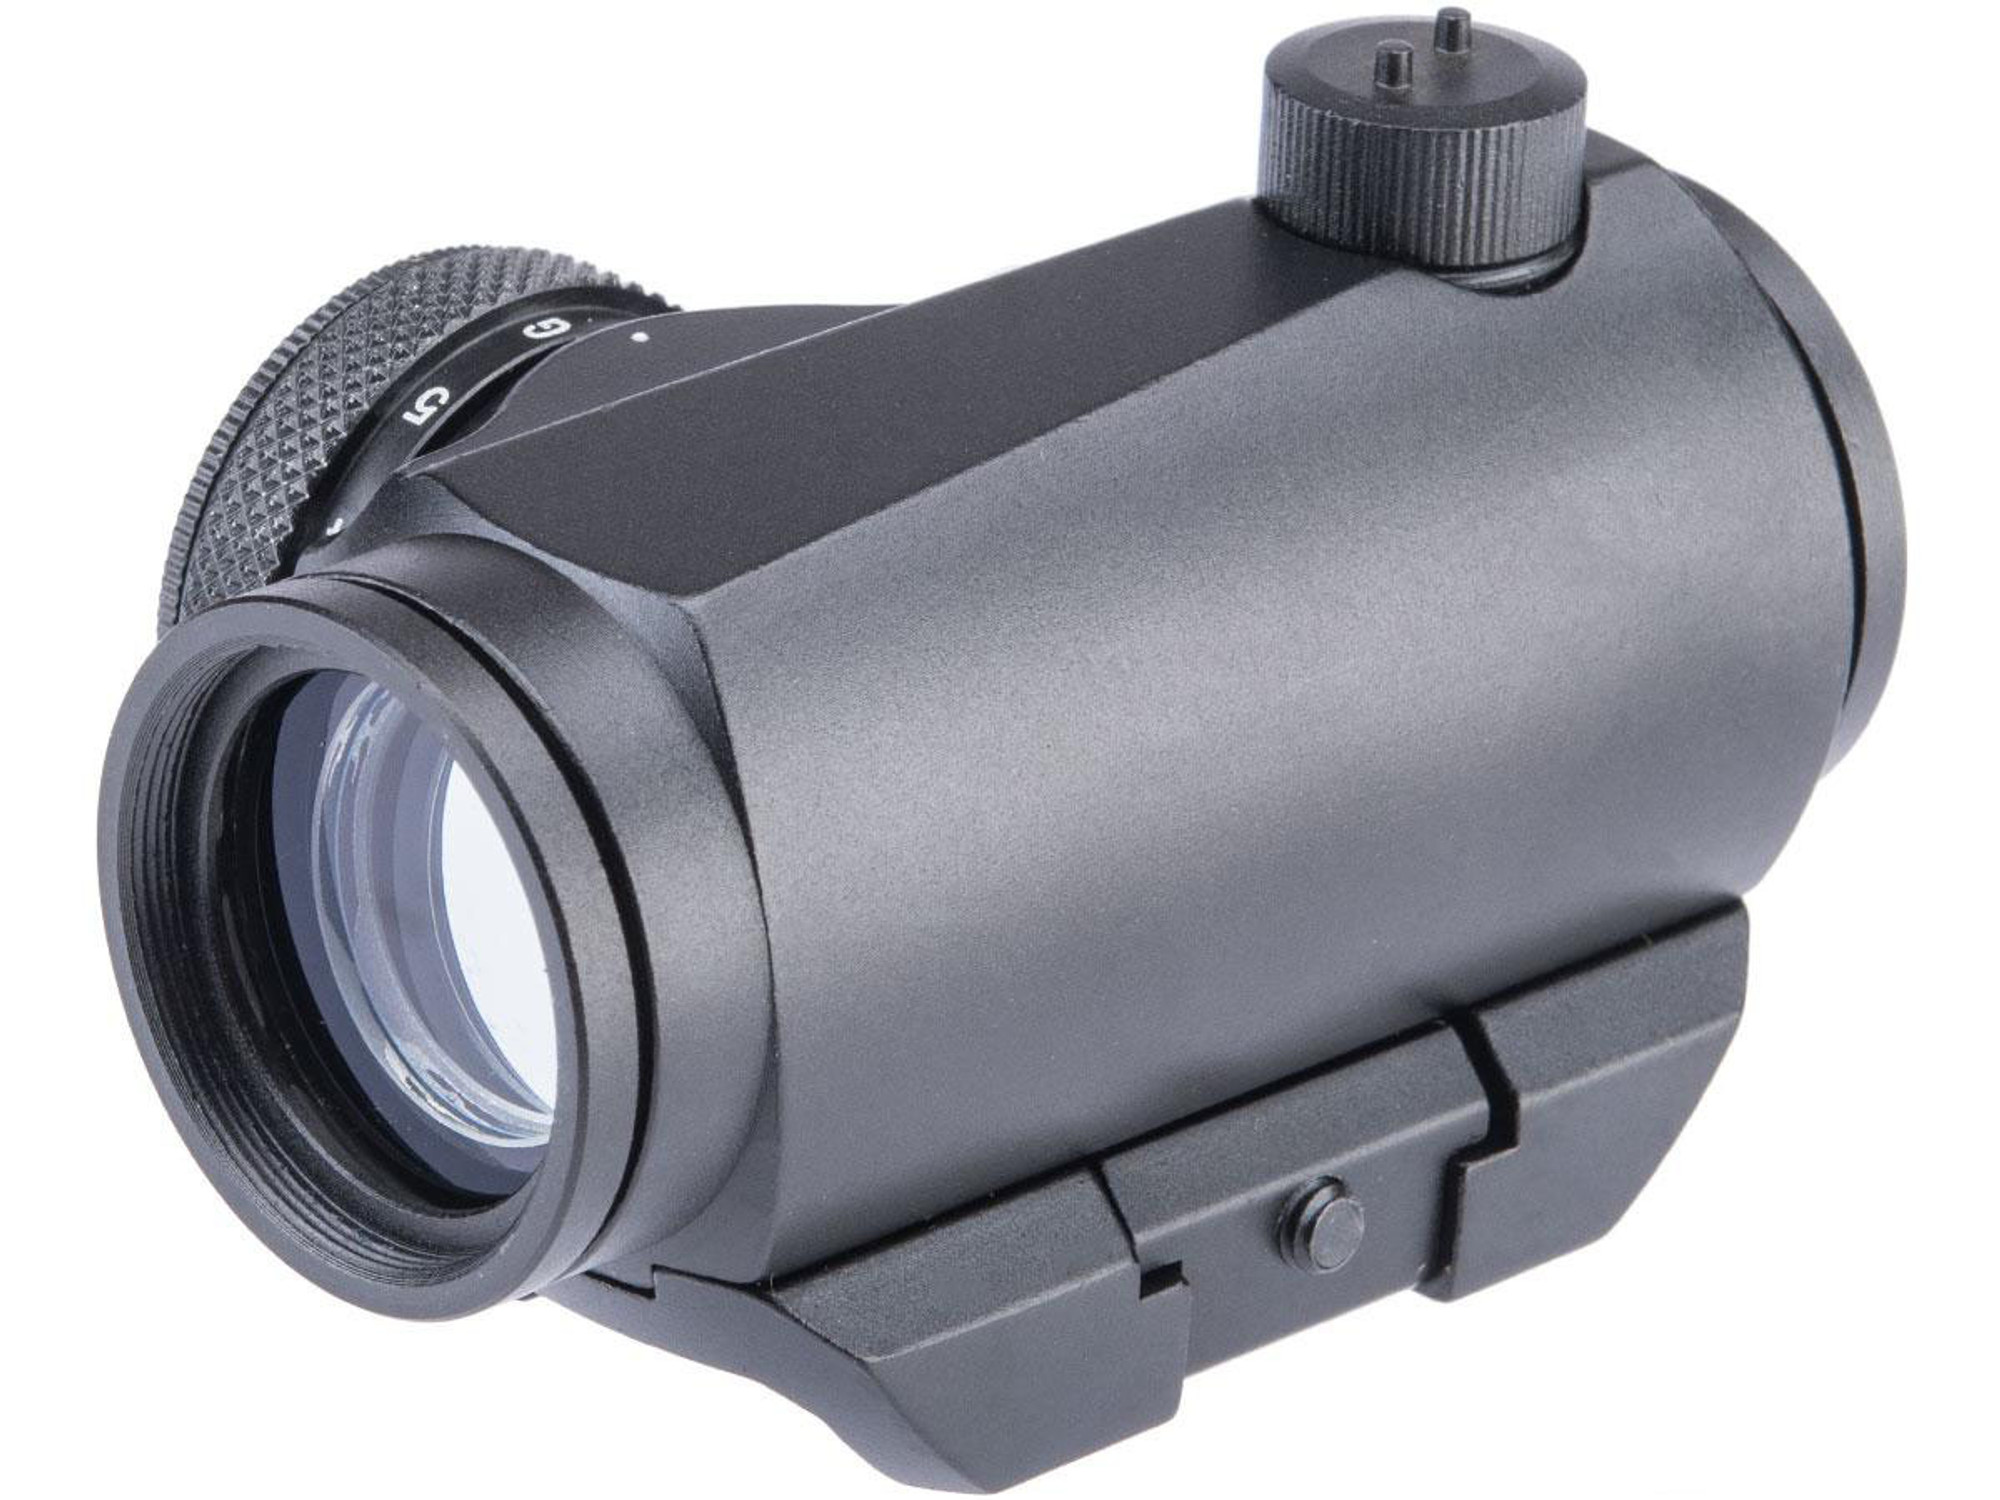 Avengers T1 Micro Reflex Red & Green Dot Sight / Scope w/ Low Mount & Offset Mount (Color: Black)